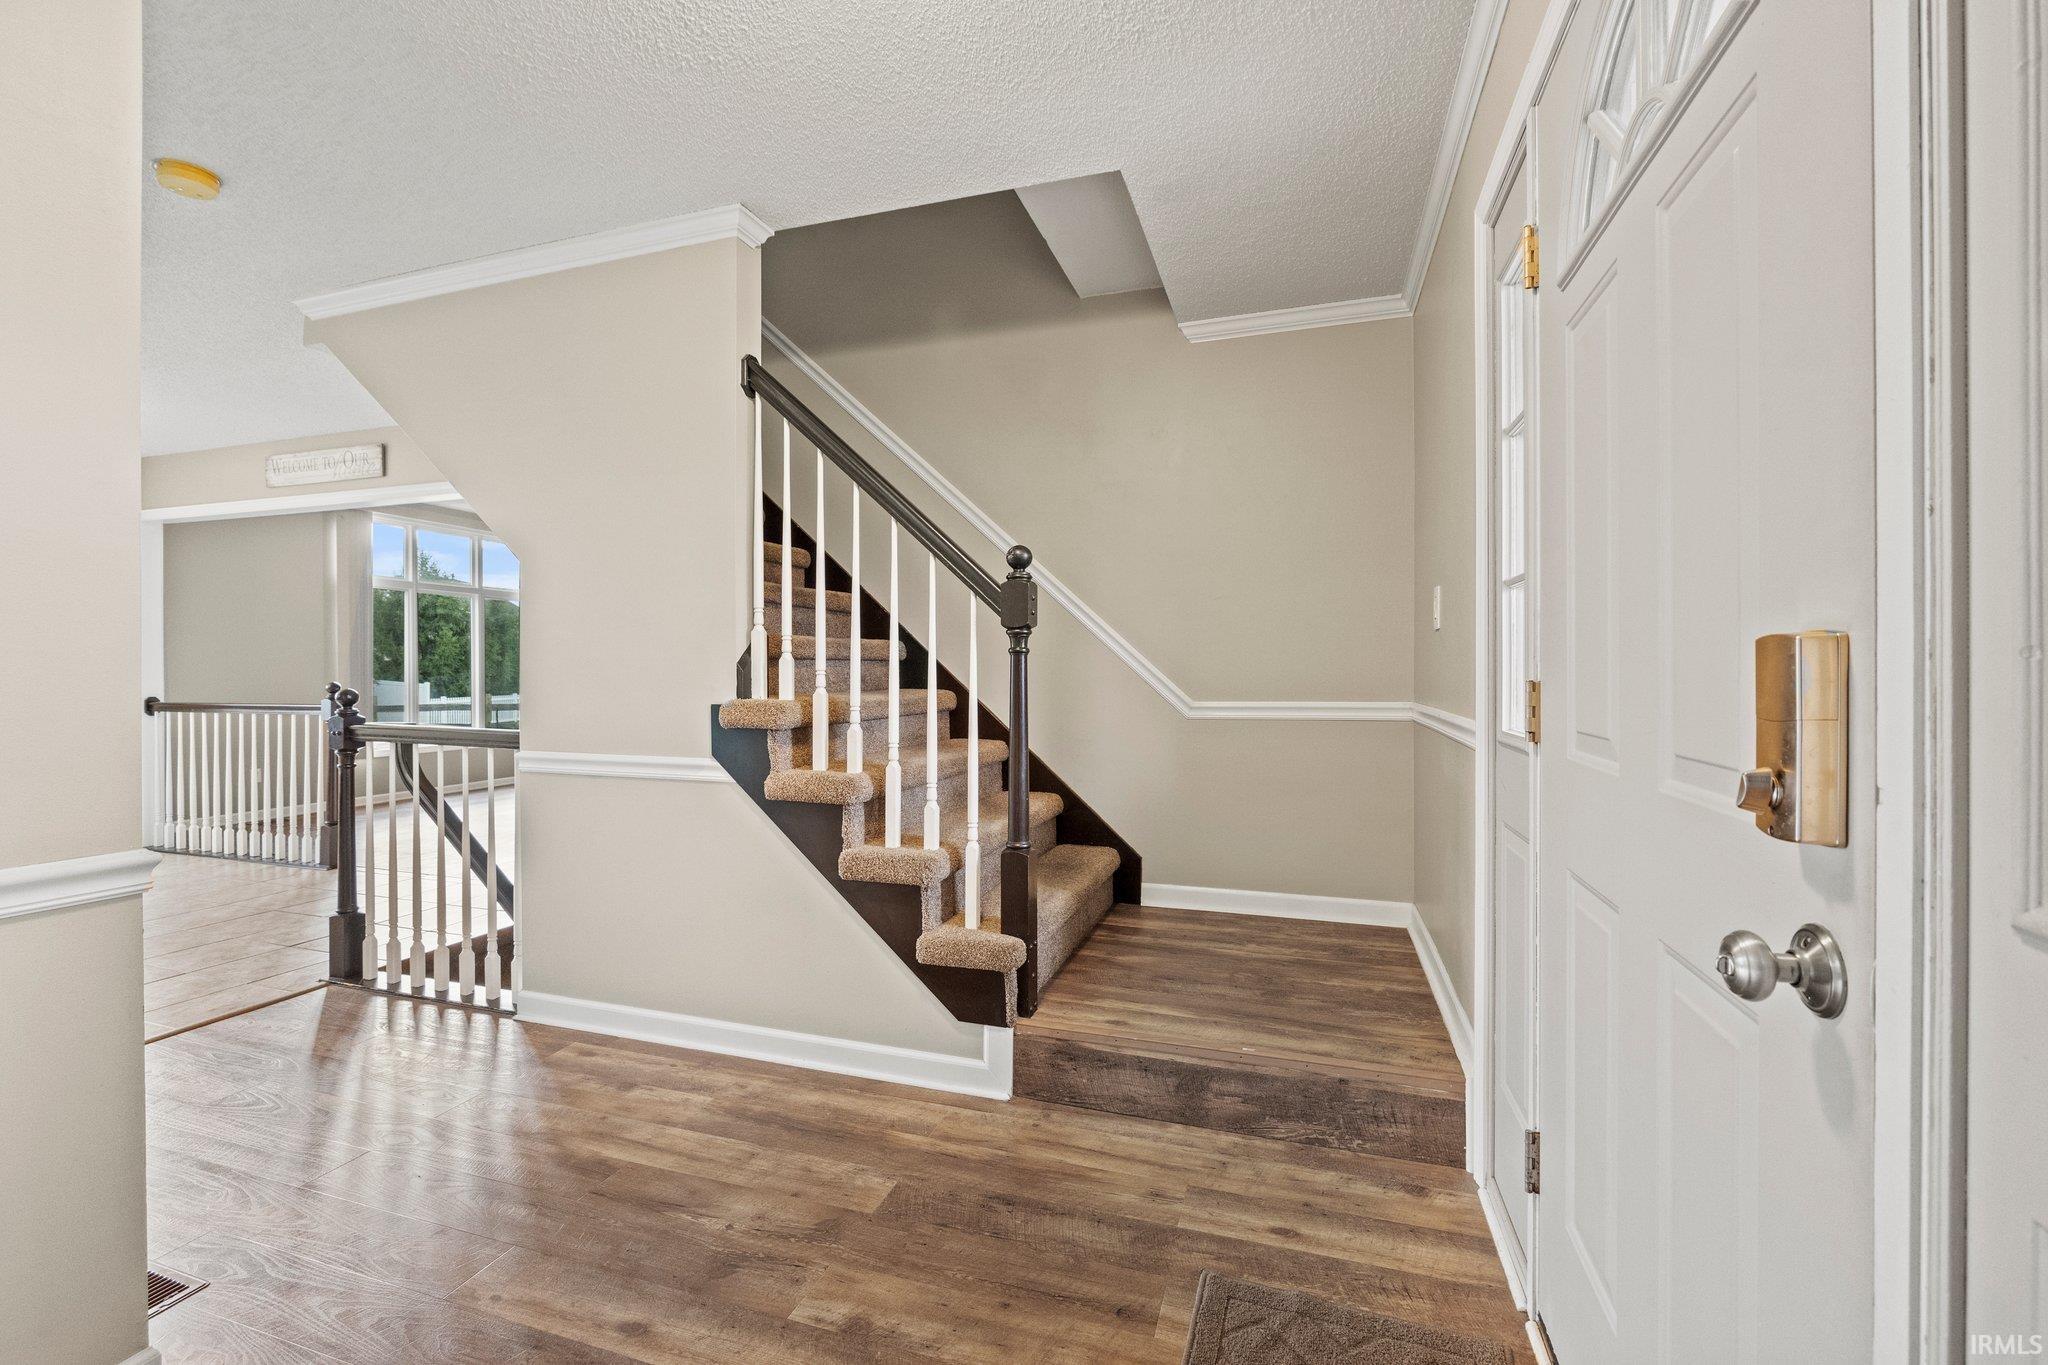 Photo 4 of 14903 Sea Holly Court